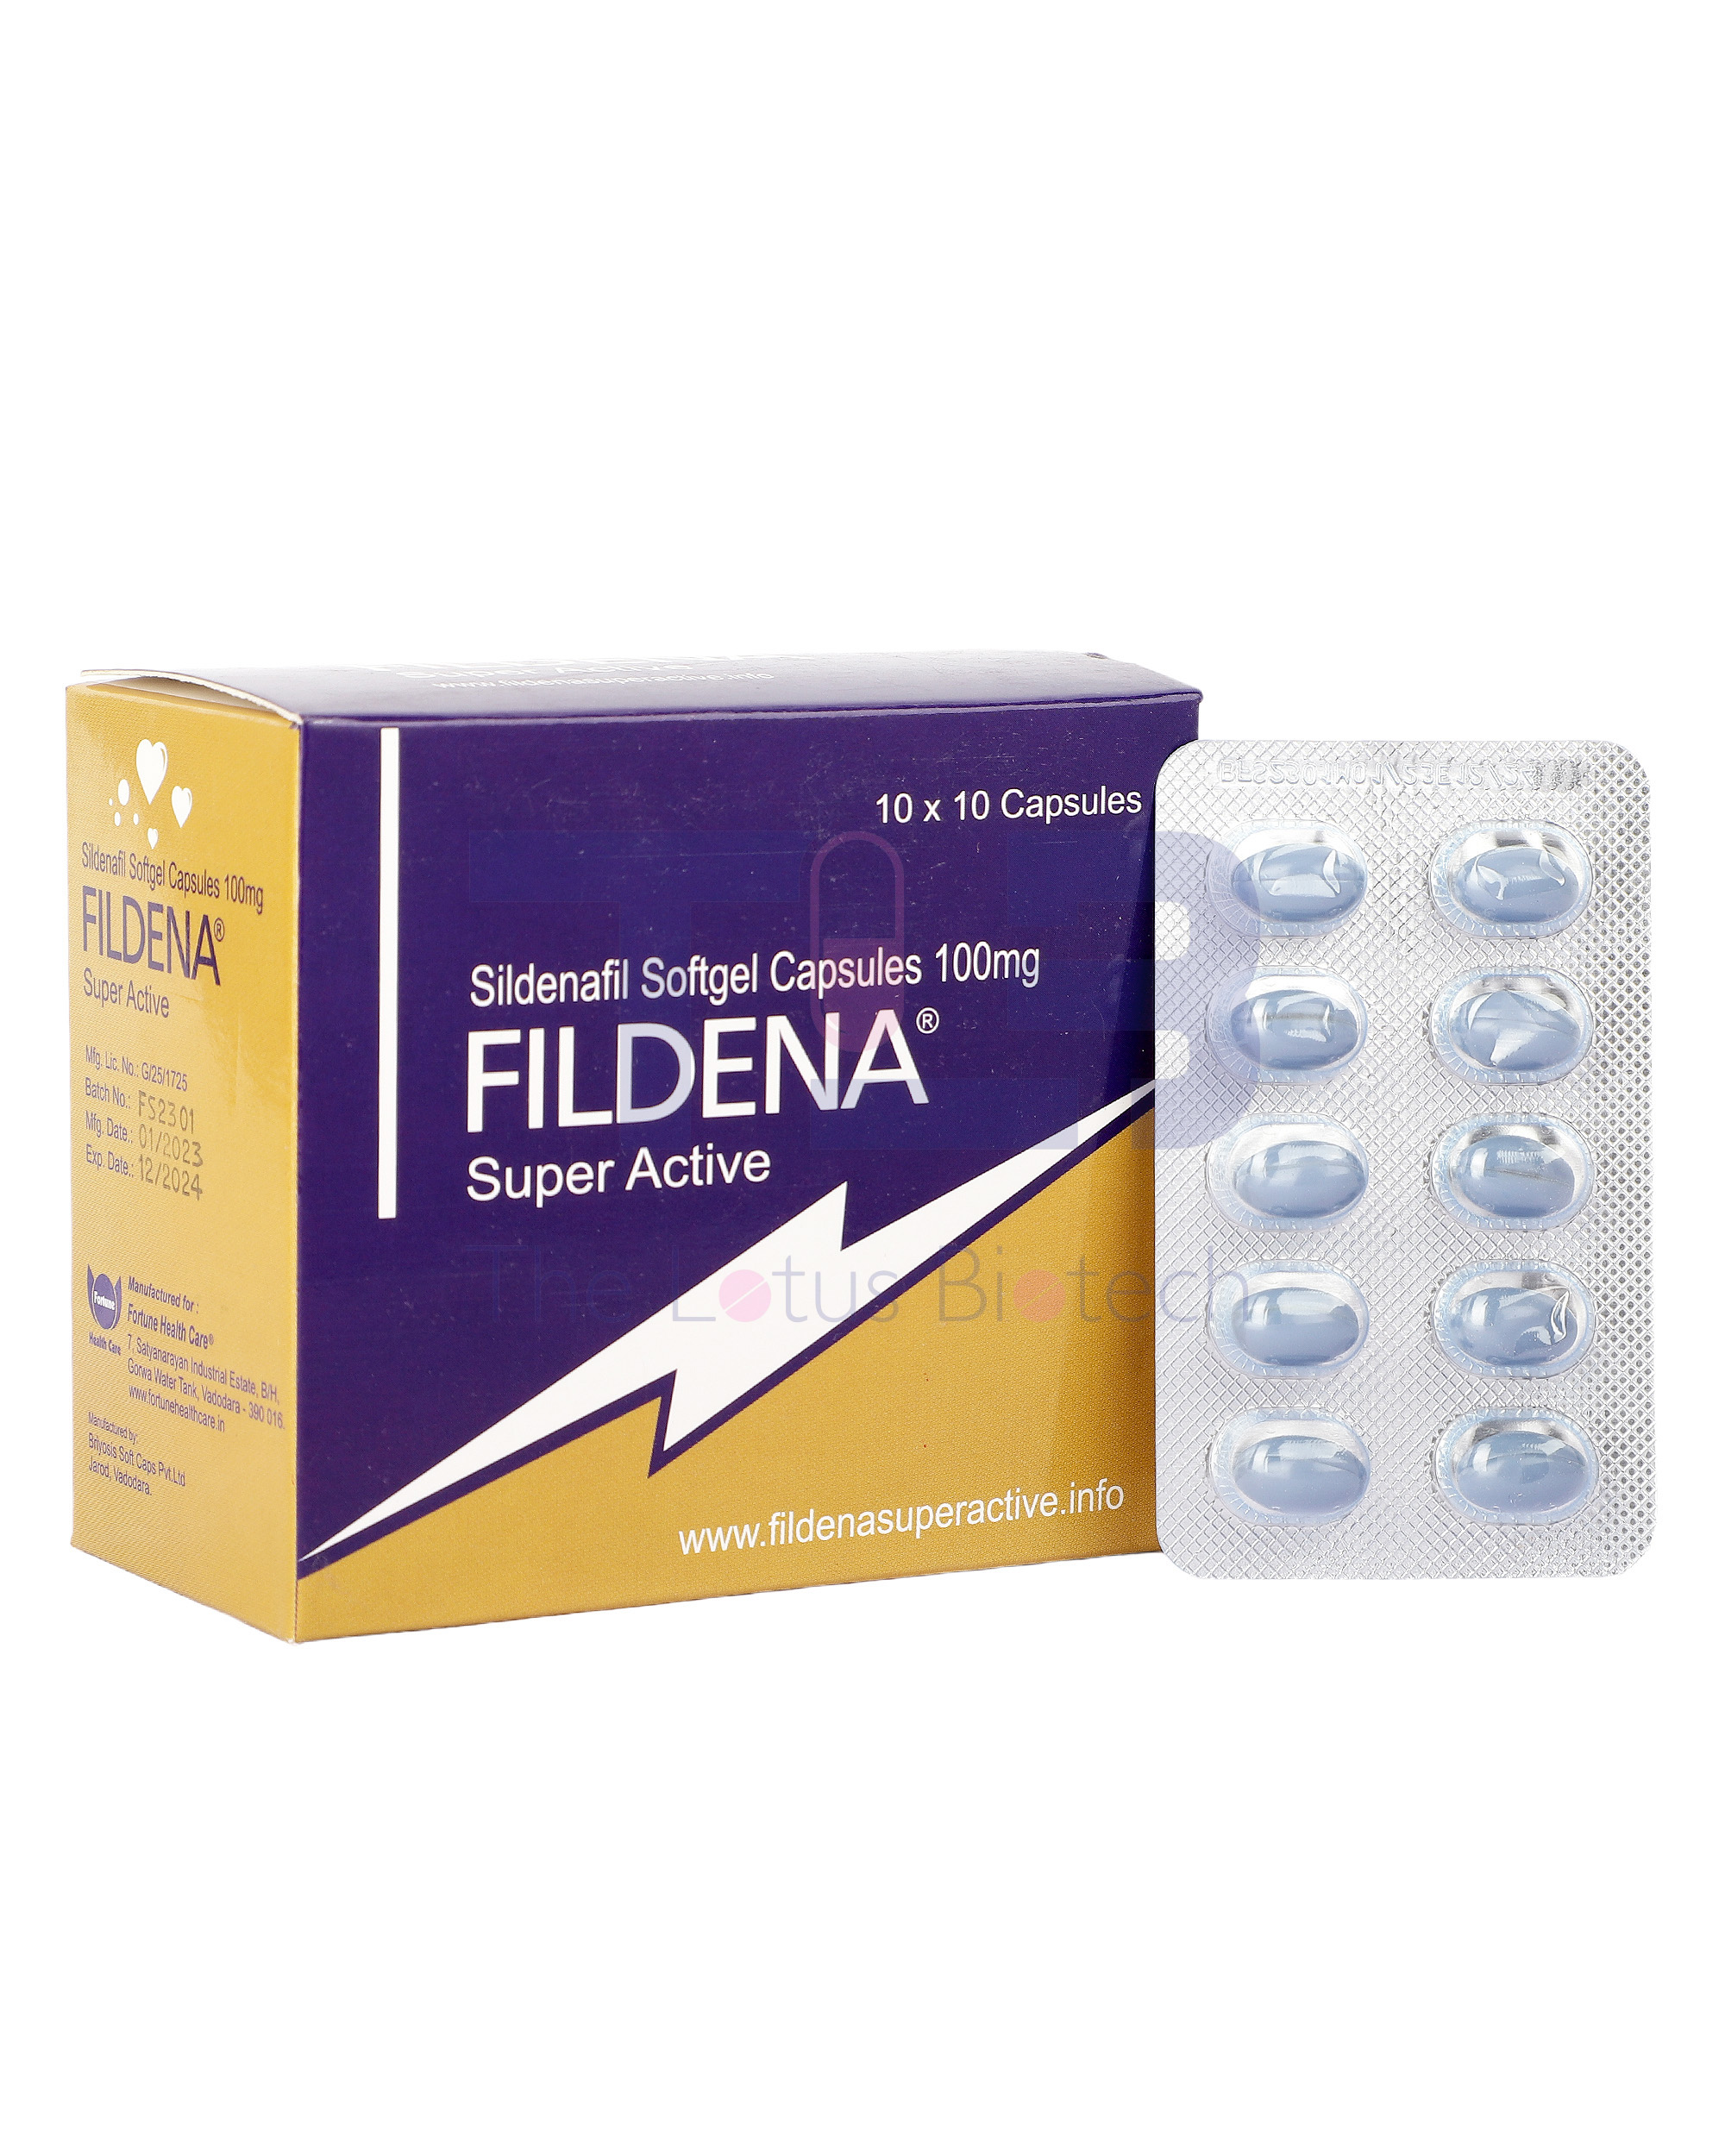 Buy Fildena Super Active 100mg Sildenafil Citrate Tablets Online at Wholesale Price